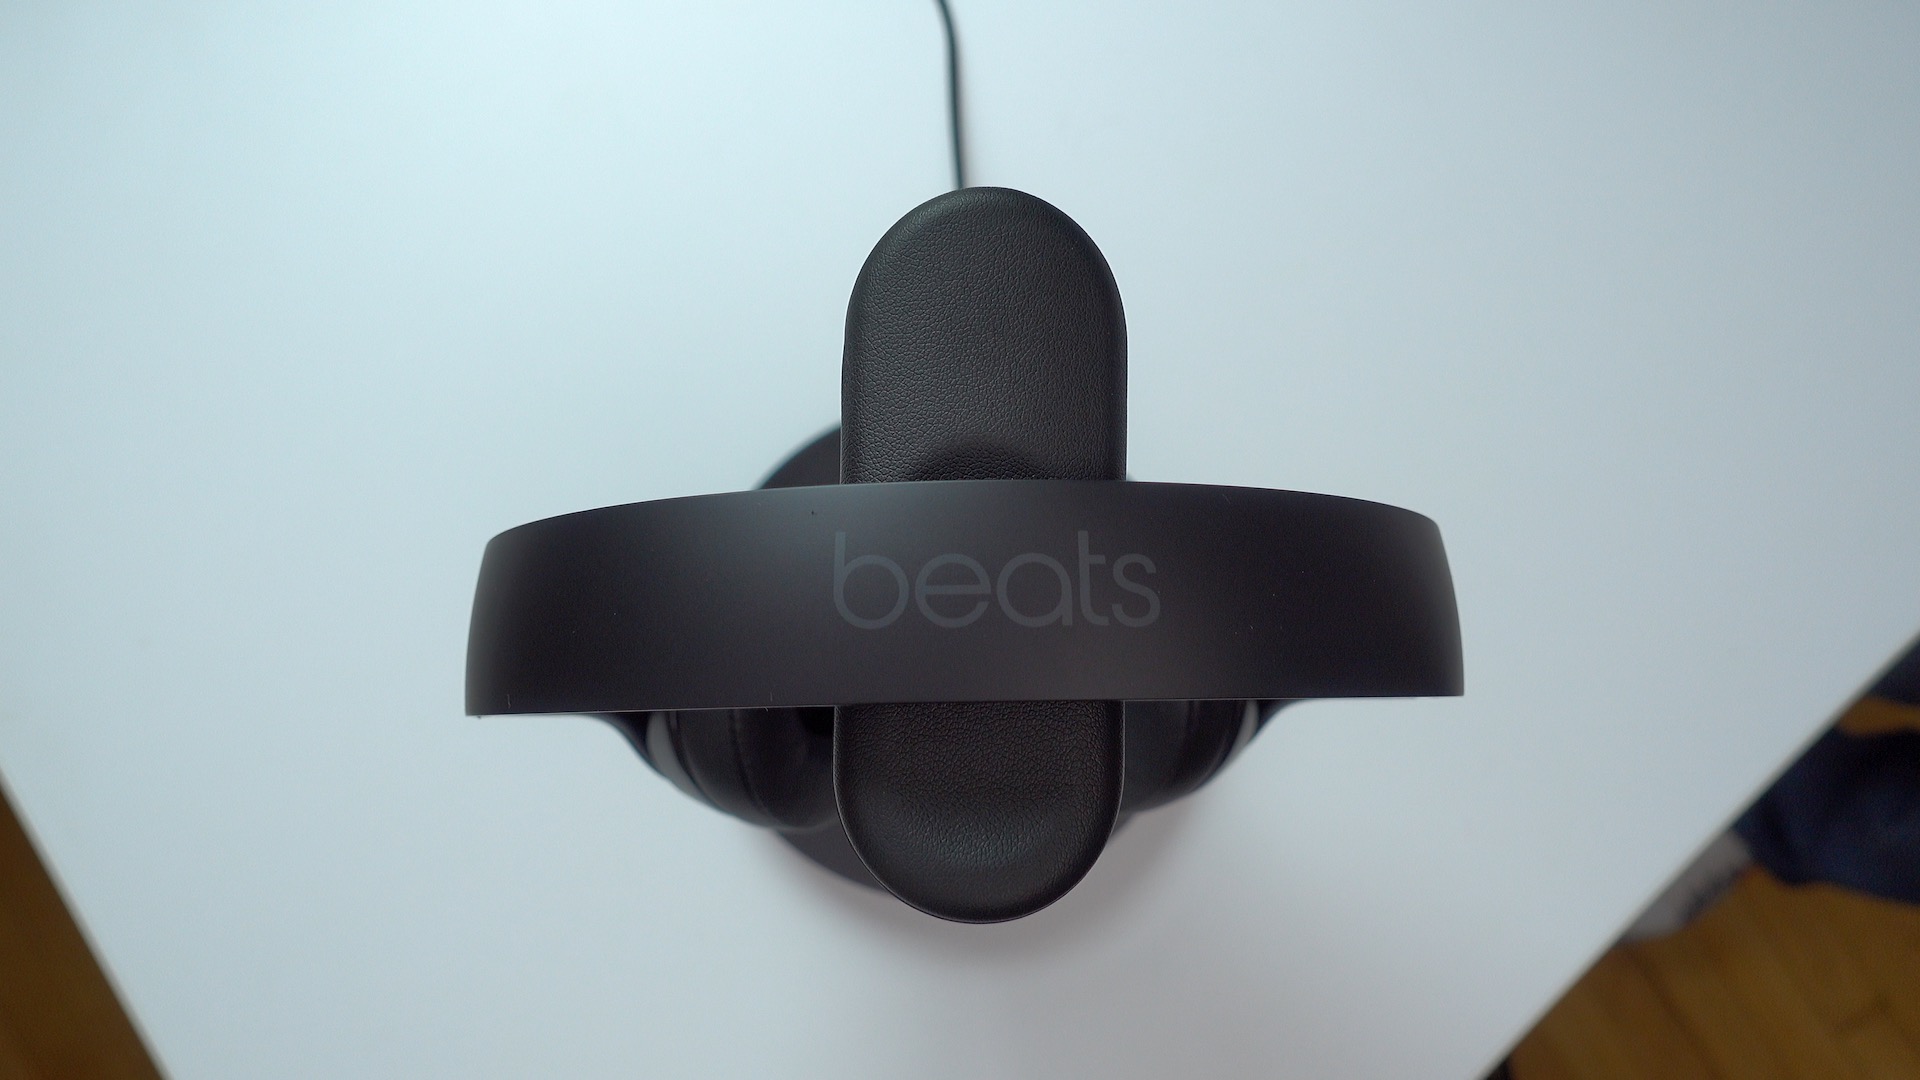 beats charging stand